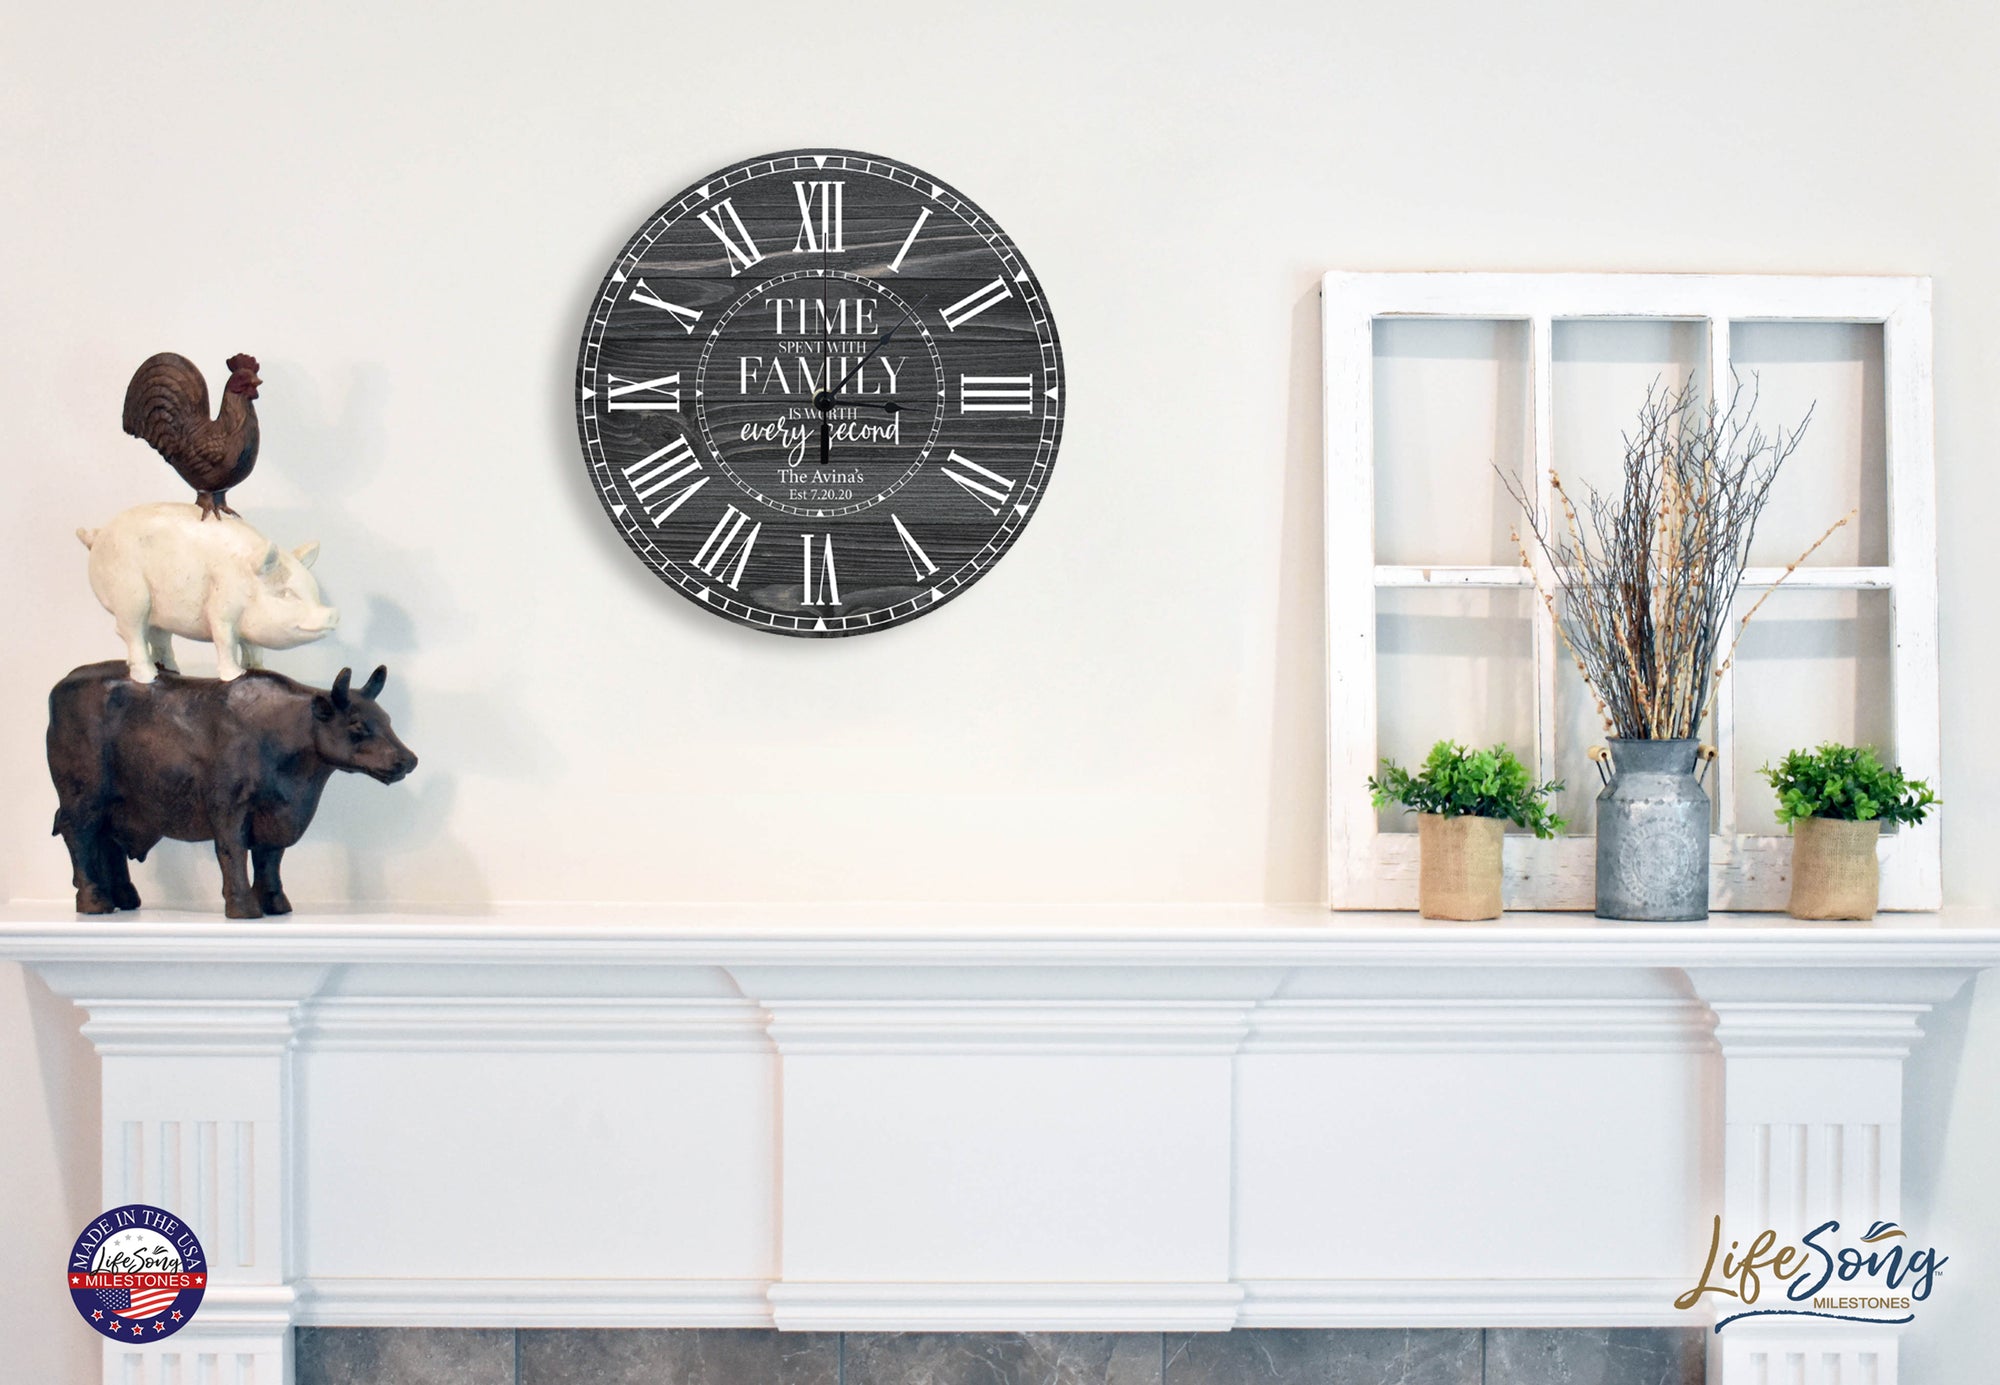 Lifesong Milestones Personalized Inspirational 12” Everyday Home and Family Wall Clock - (The Family). Wooden Decoration for Wedding, Anniversary Gift for Couples, Parents, Him, Her, Husband, Wife.